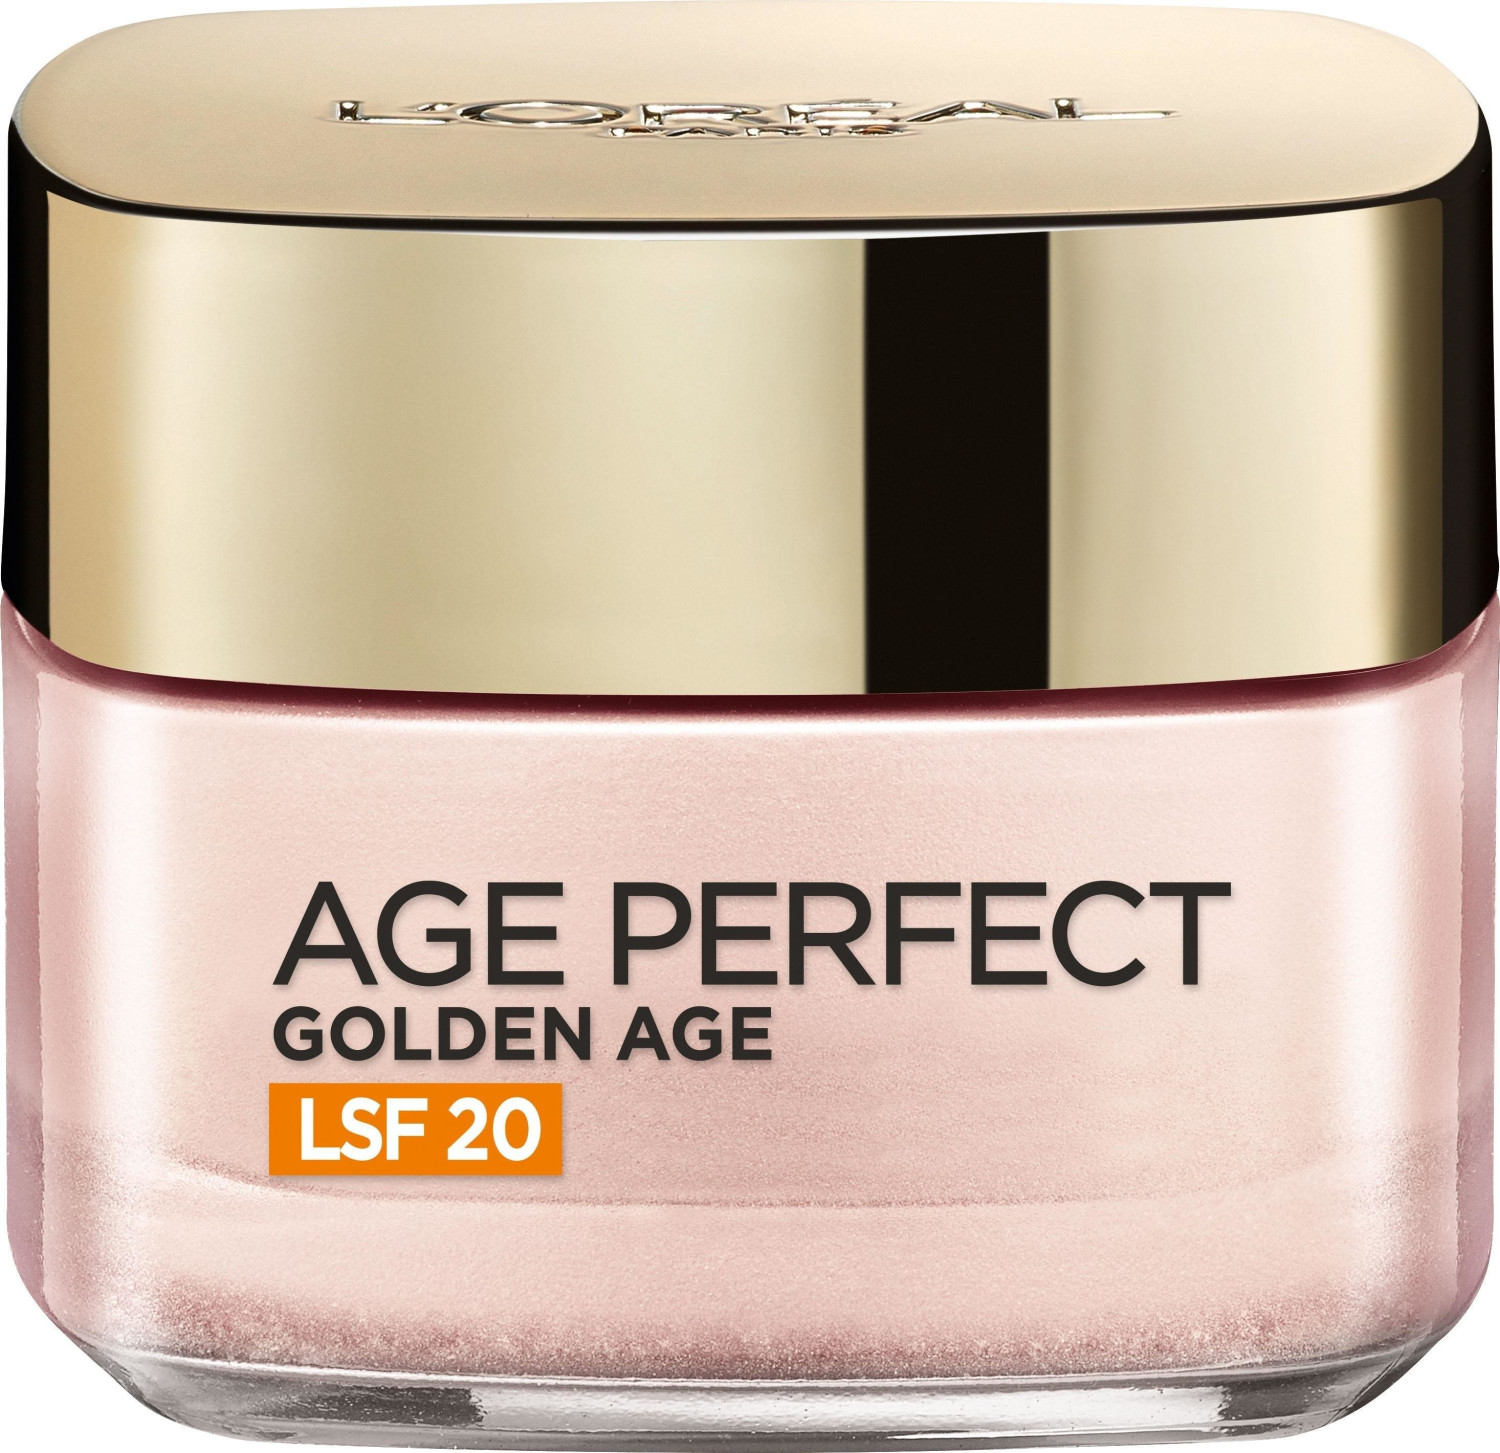 Photos - Other Cosmetics LOreal L'Oréal Age Perfect Golden Age SPF 20  (50ml)